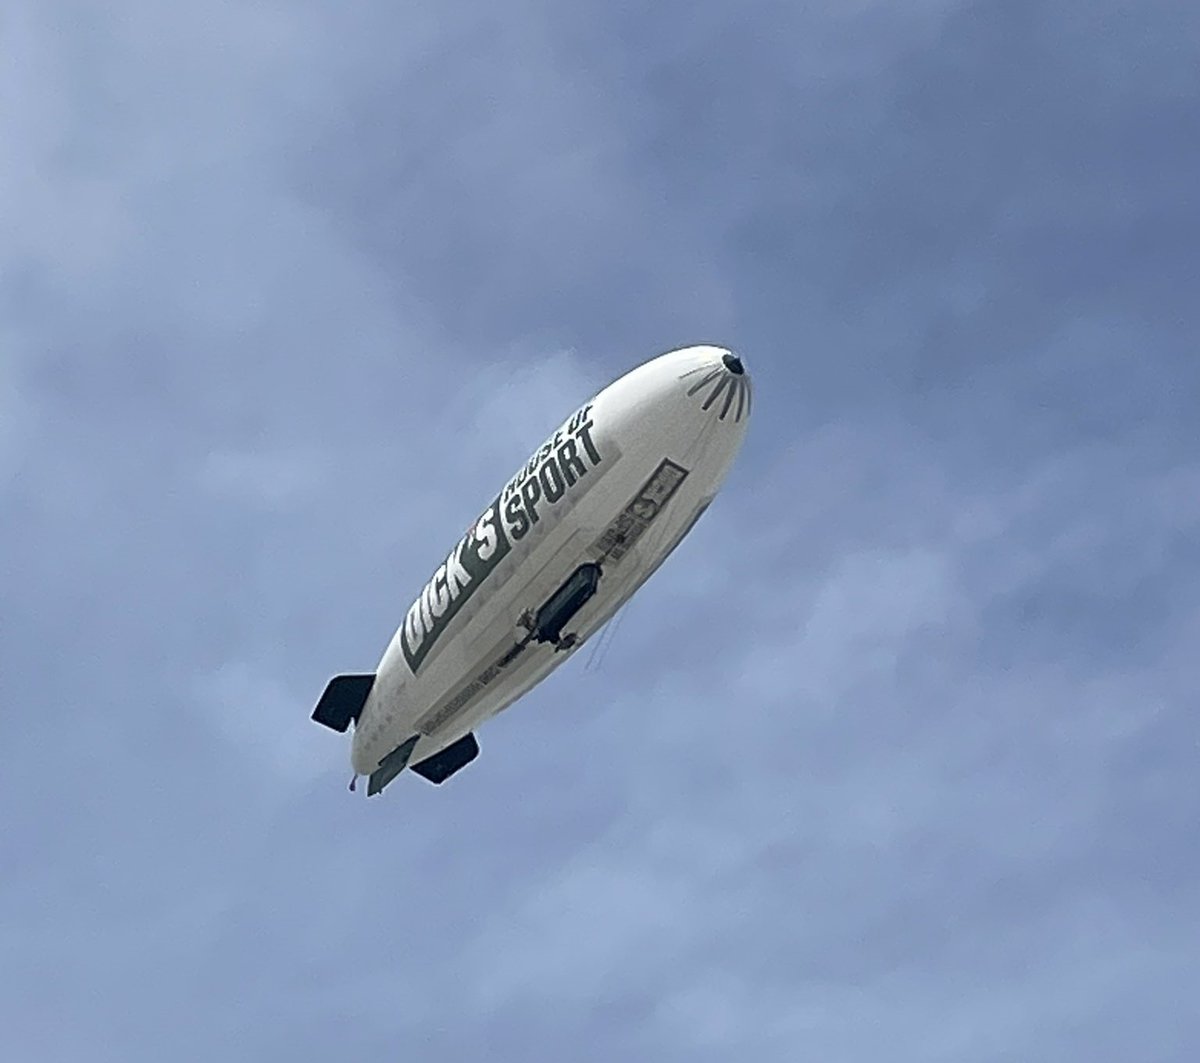 𝐁𝐥𝐢𝐦𝐩𝐬 𝐎𝐯𝐞𝐫 𝐋𝐨𝐰𝐞𝐥𝐥: Anyone know why there was a blimp hovering in the skies above the Mill City a little after noon today? Real or creative answers encouraged #InsideLowell